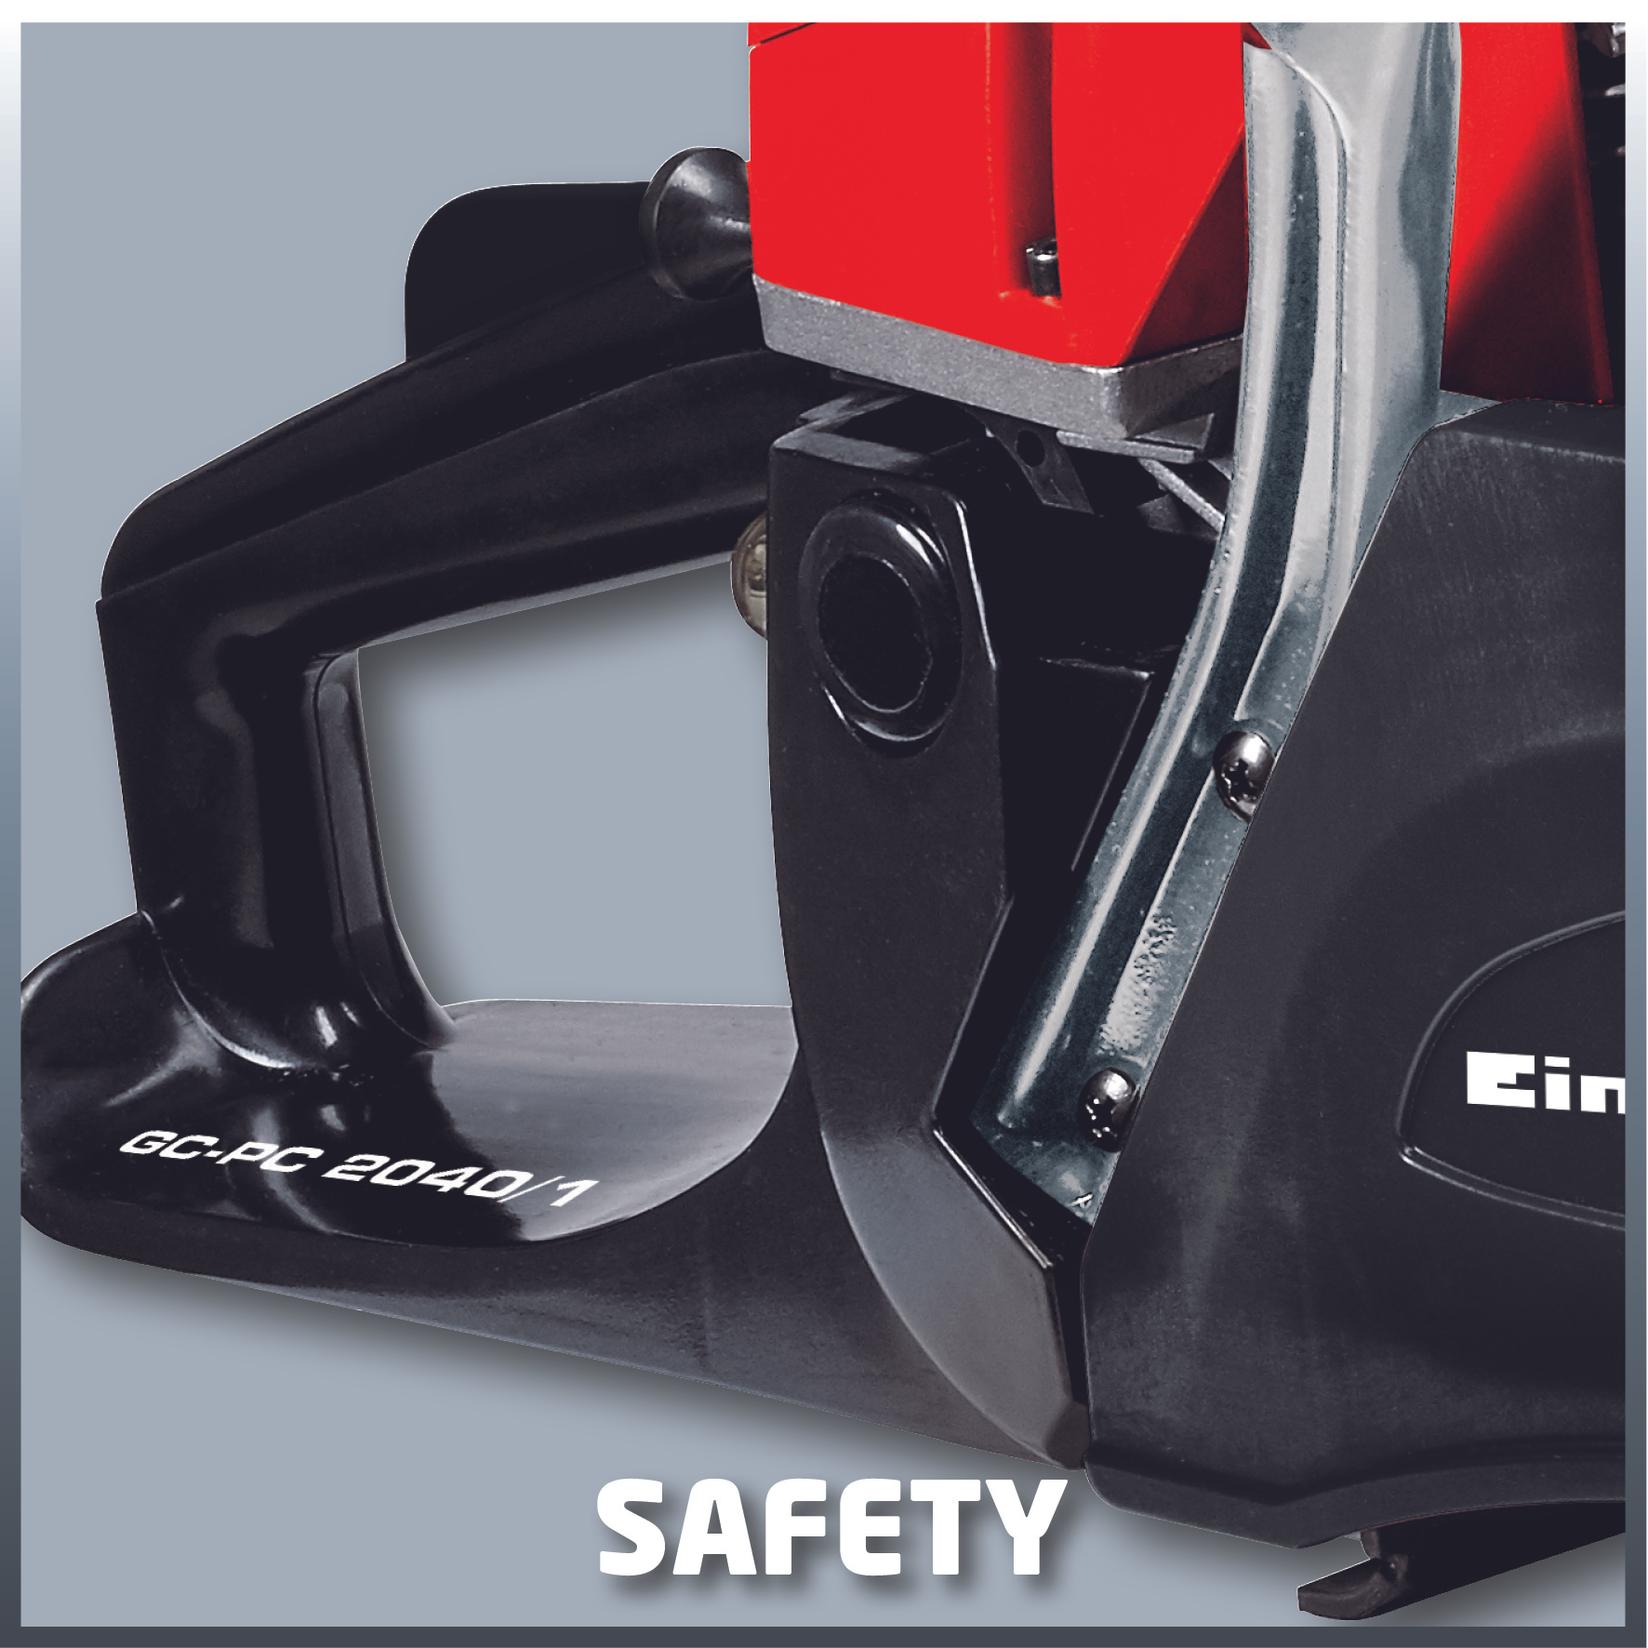 Selected image for EINHELL Motorna testera GC-PC 2040/1